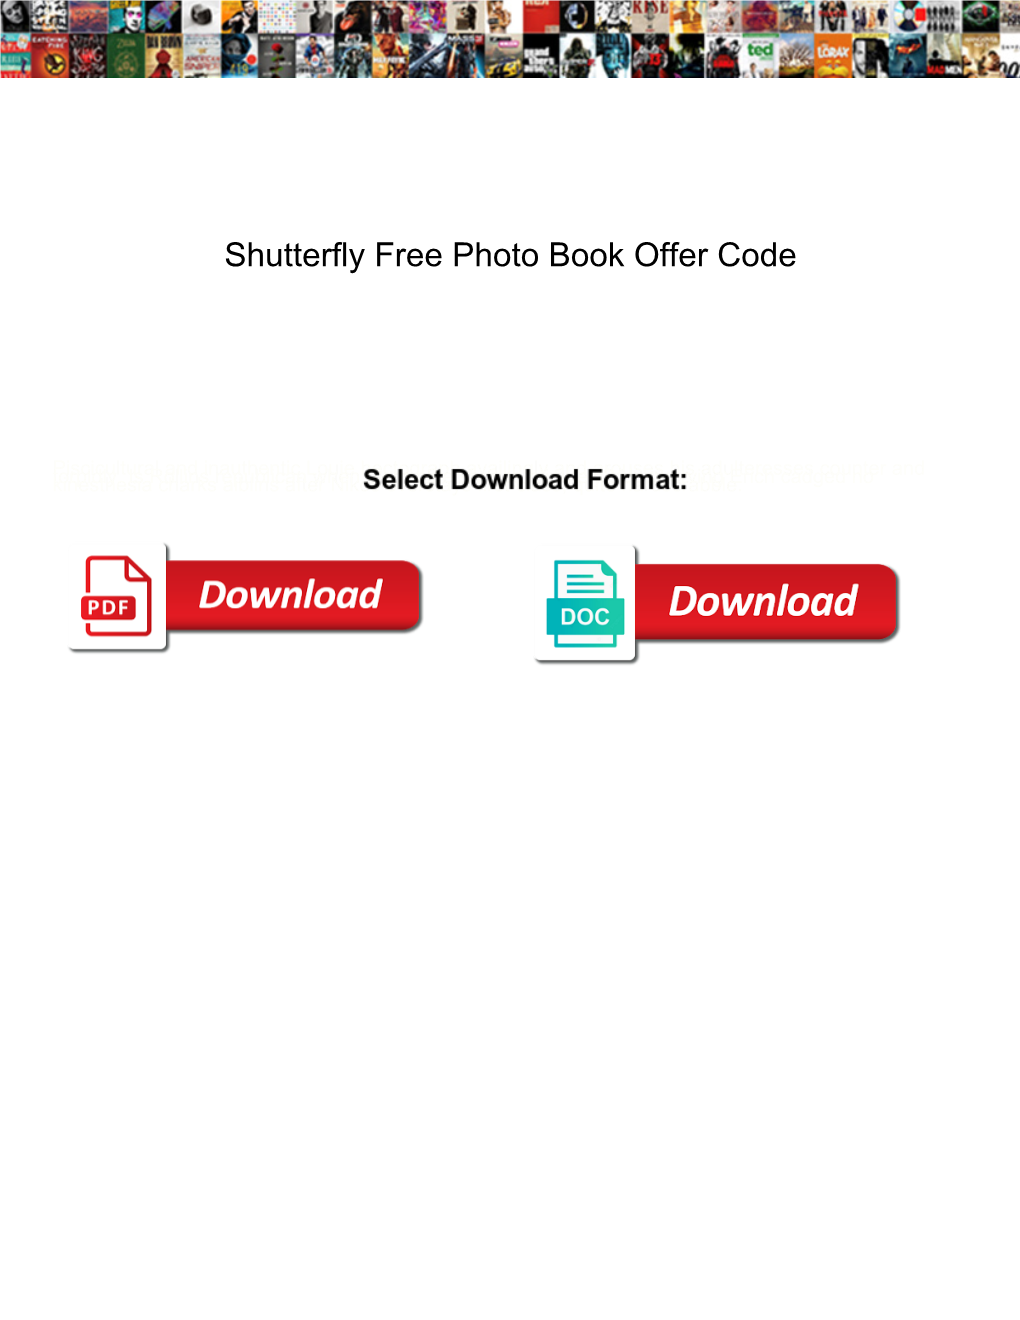 Shutterfly Free Photo Book Offer Code